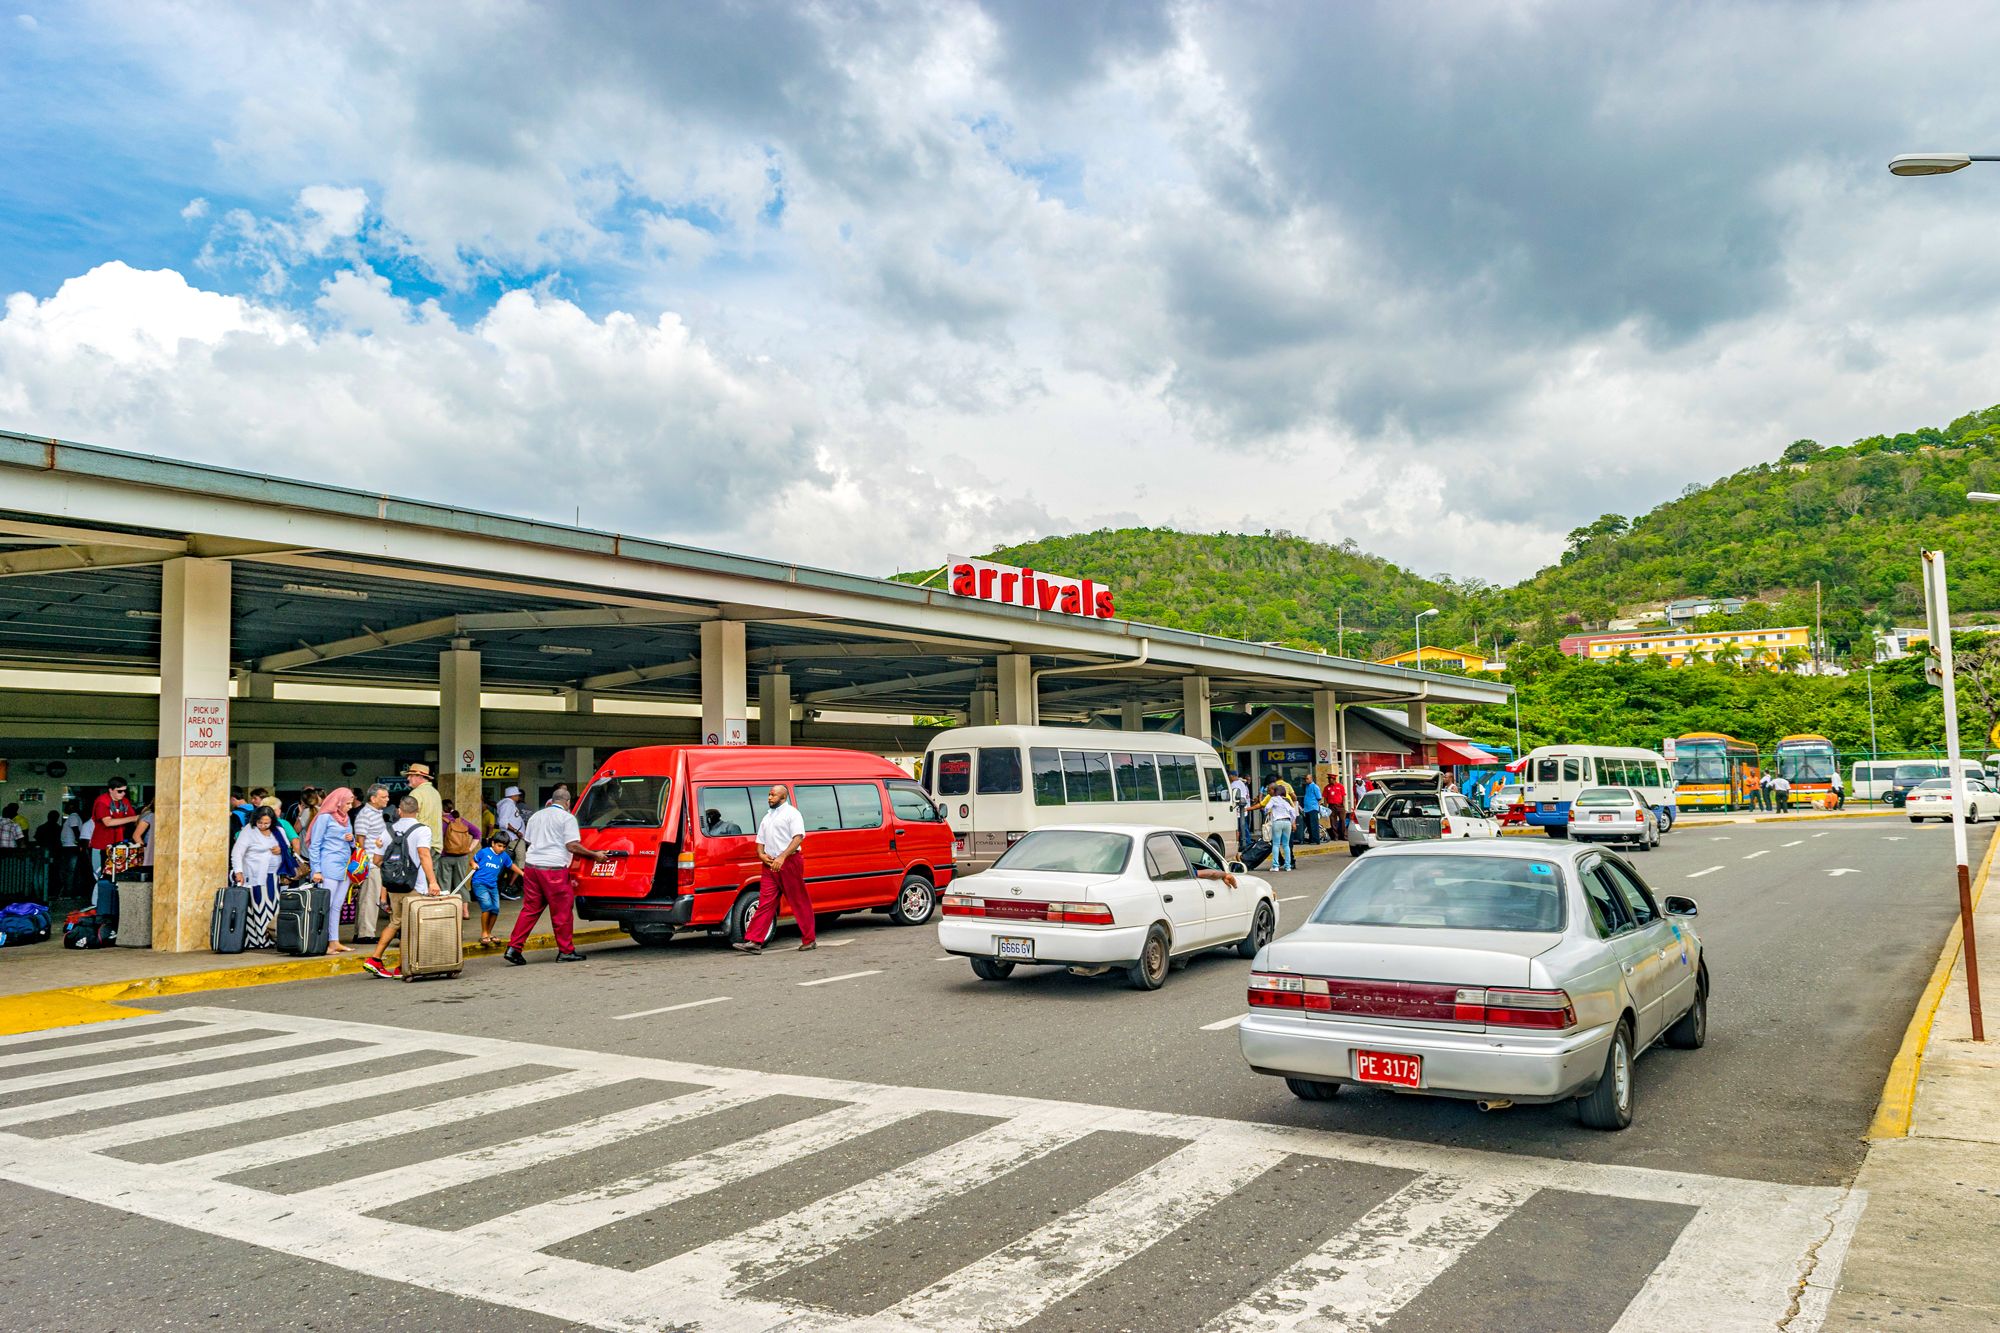 Airport-Red-Plate-Cab-Jamaica